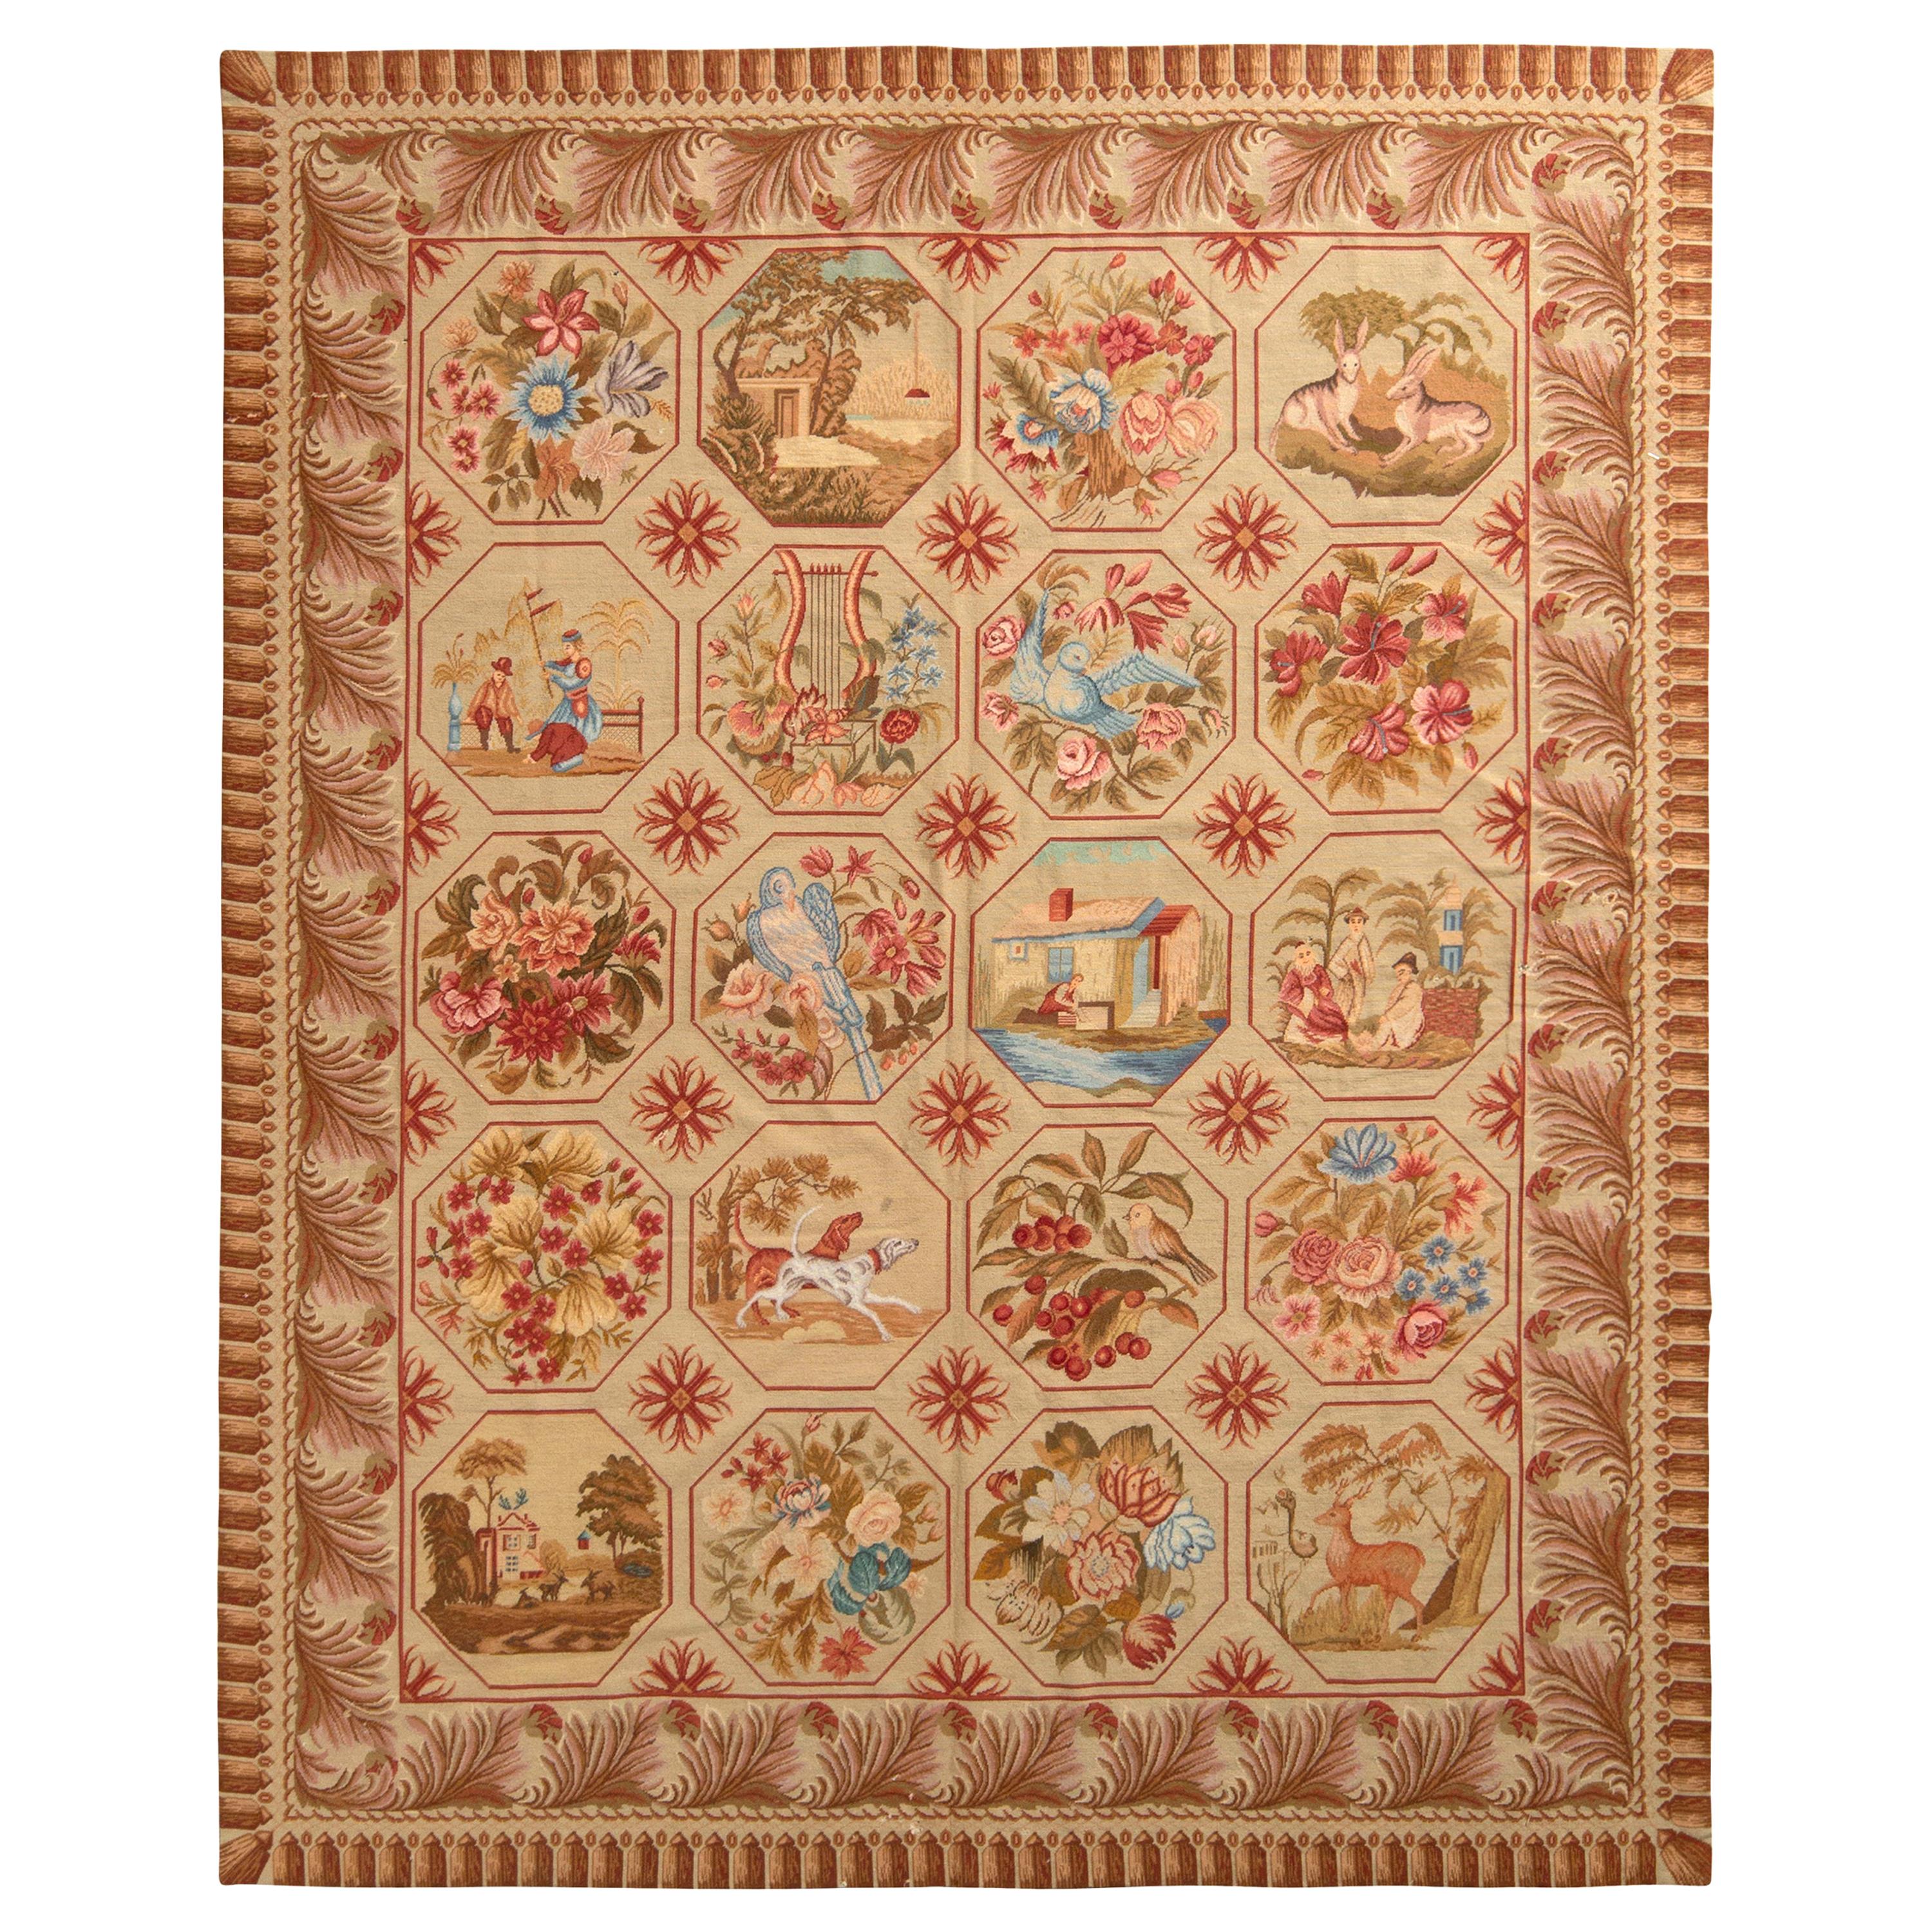 Antique Needlepoint Rug in Beige-Brown Floral Pictorial Pattern by Rug & Kilim For Sale